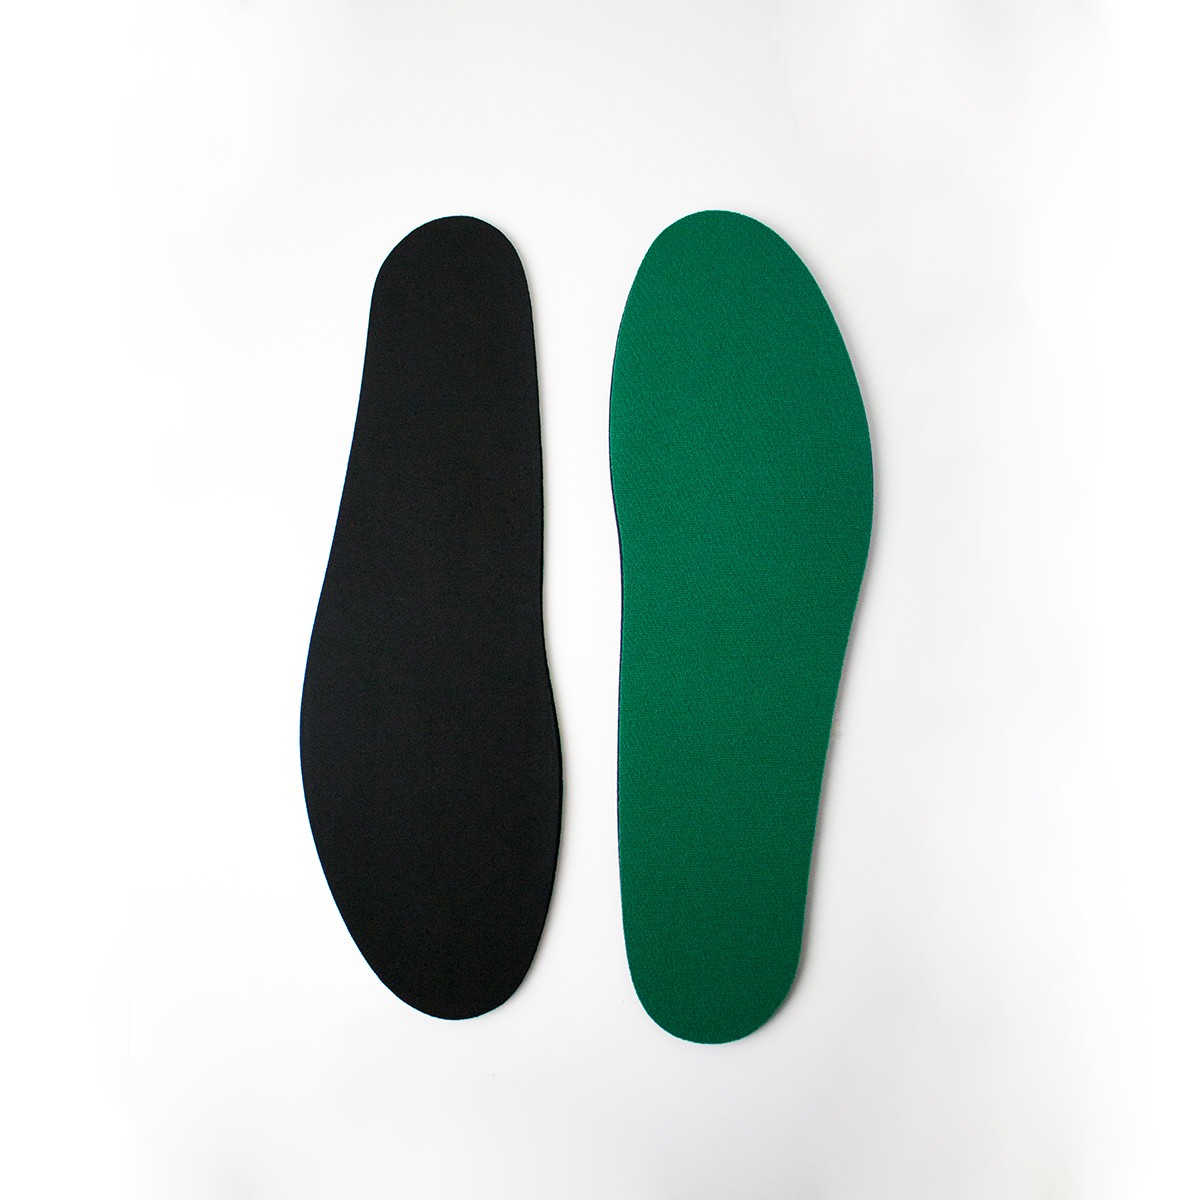 insoles for boots